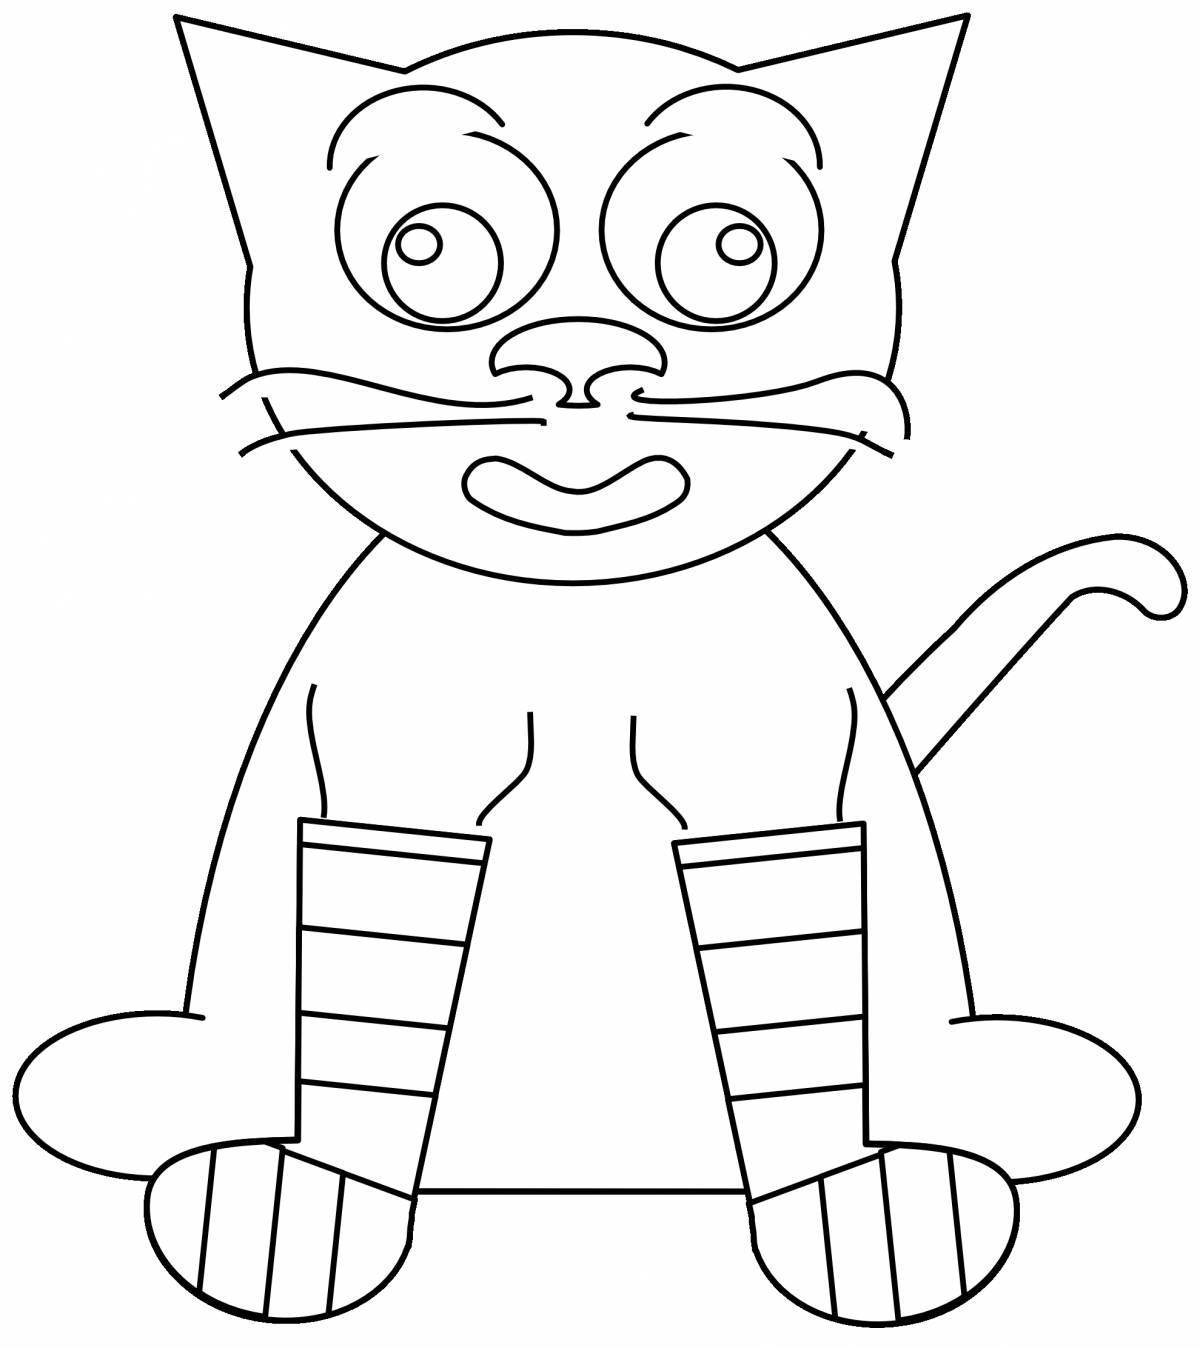 A fun coloring book for kids on a cardboard cat